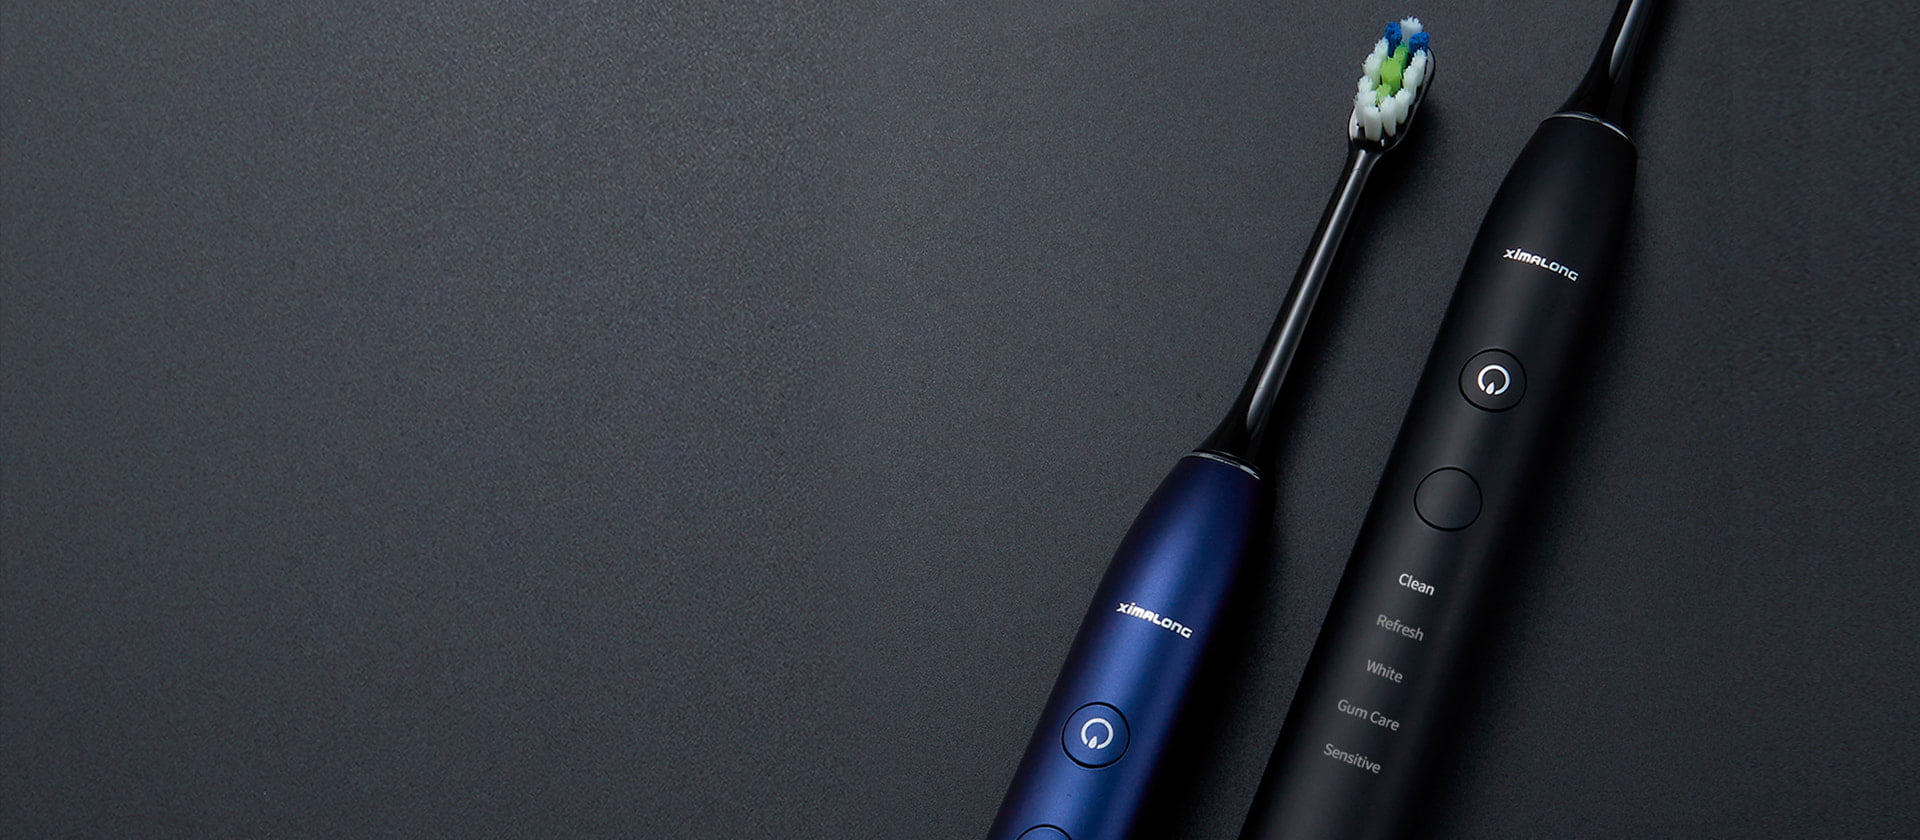 ZR505P upgraded electric toothbrush